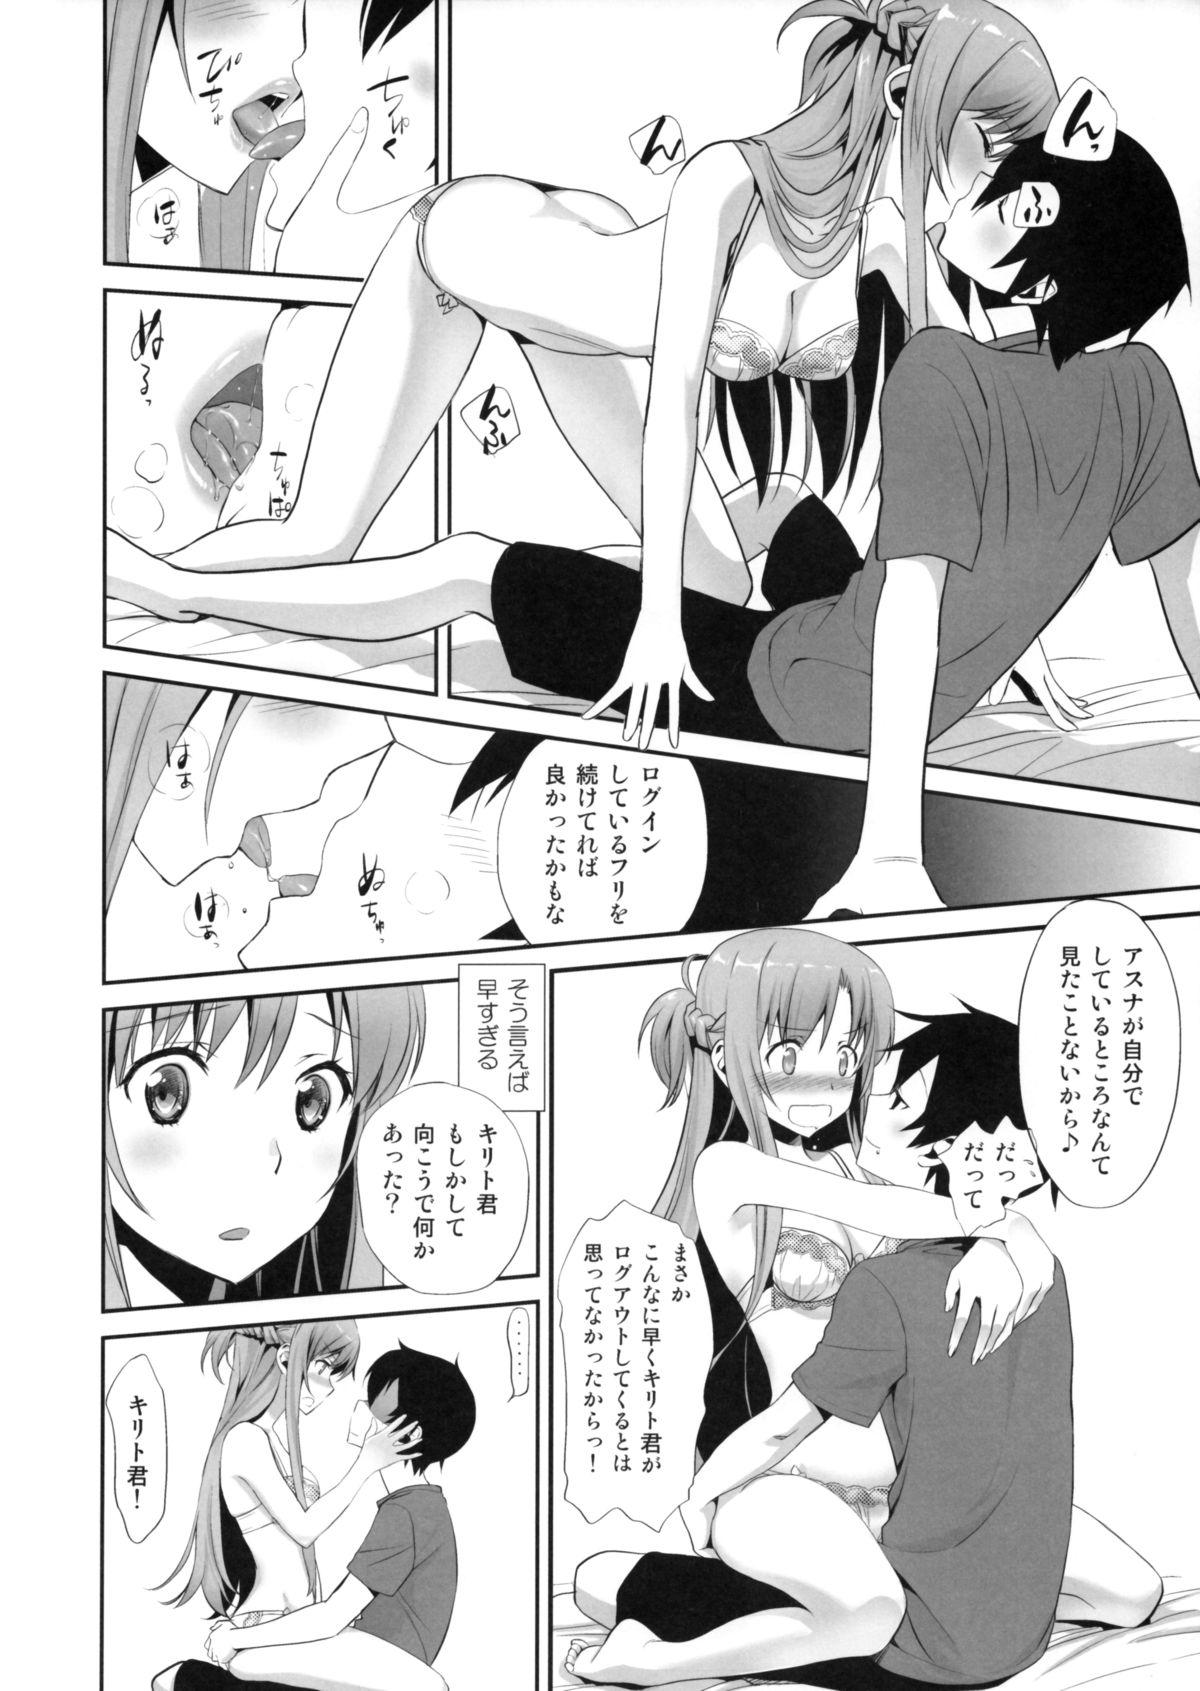 Hard Core Free Porn Sunny-side up? - Sword art online Smooth - Page 11